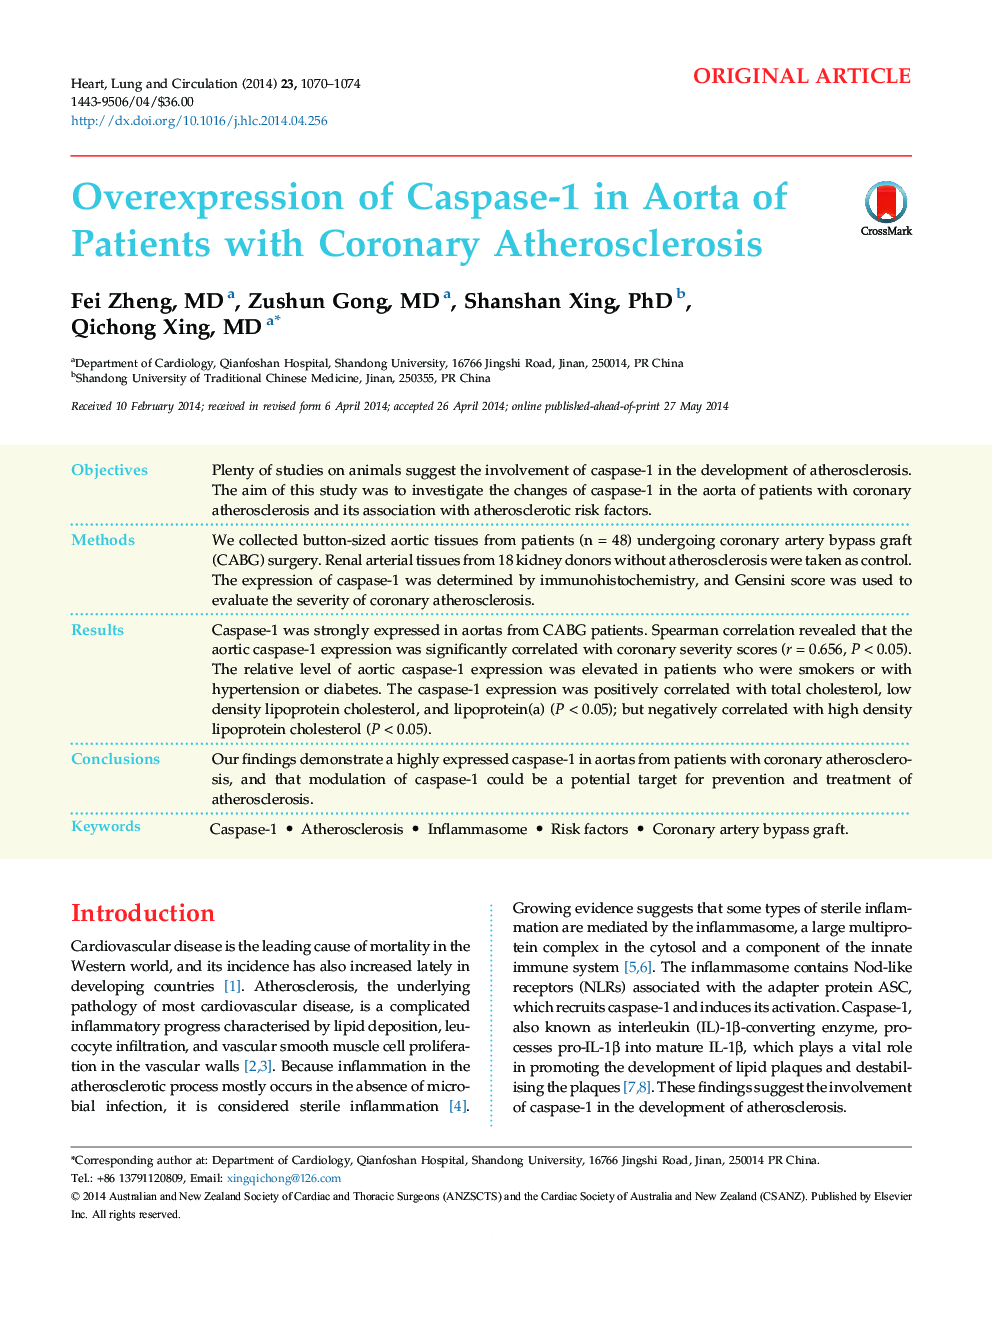 Overexpression of Caspase-1 in Aorta of Patients with Coronary Atherosclerosis